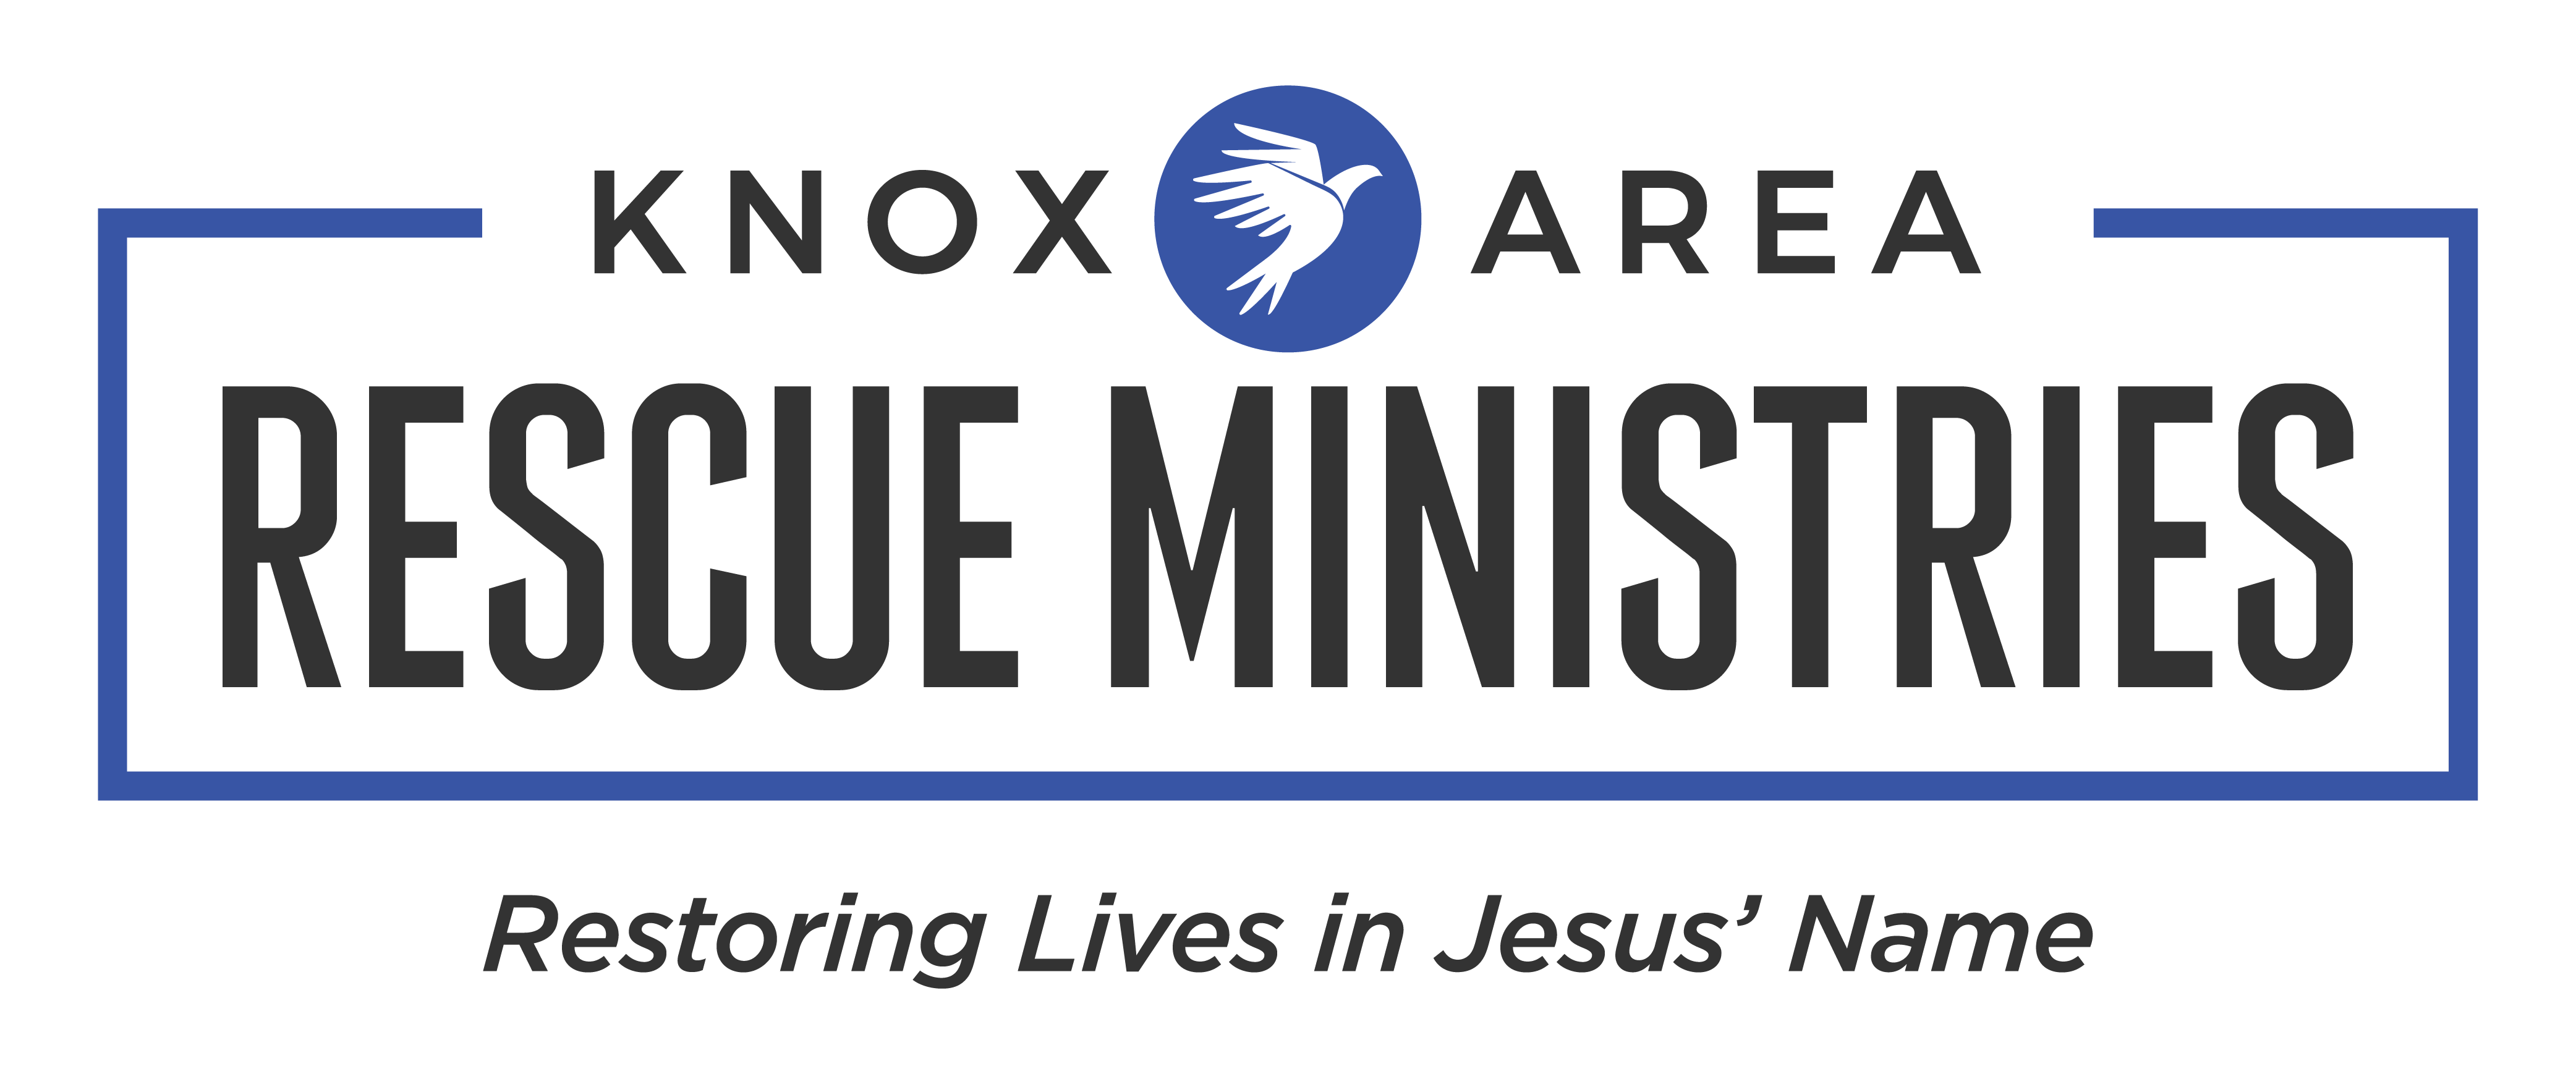 knox area rescue ministries